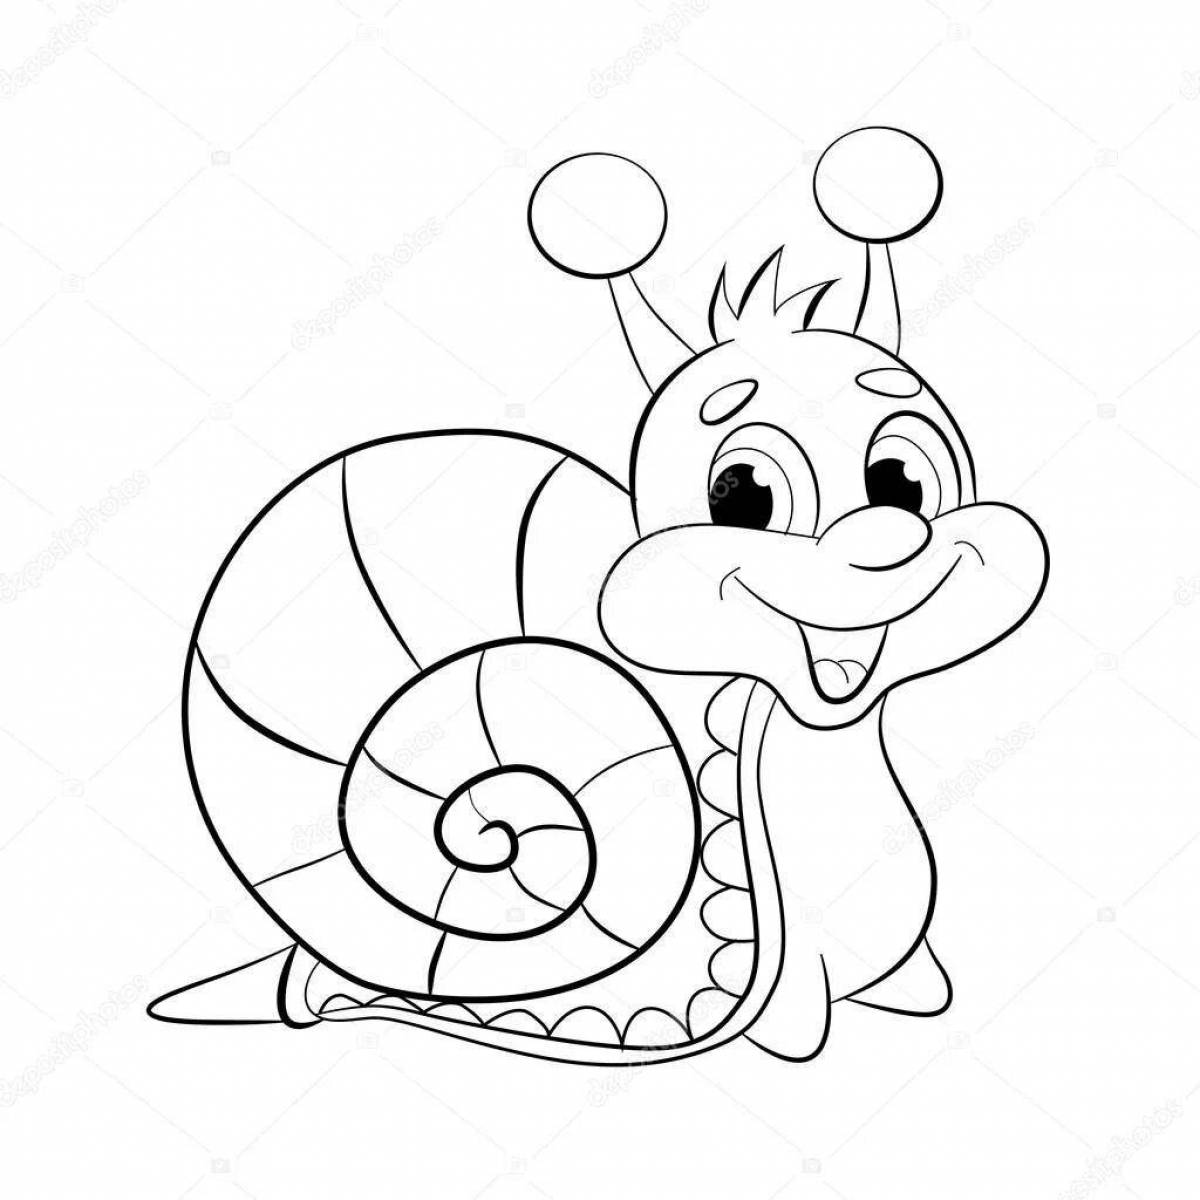 Color-loving drawing of a snail for children